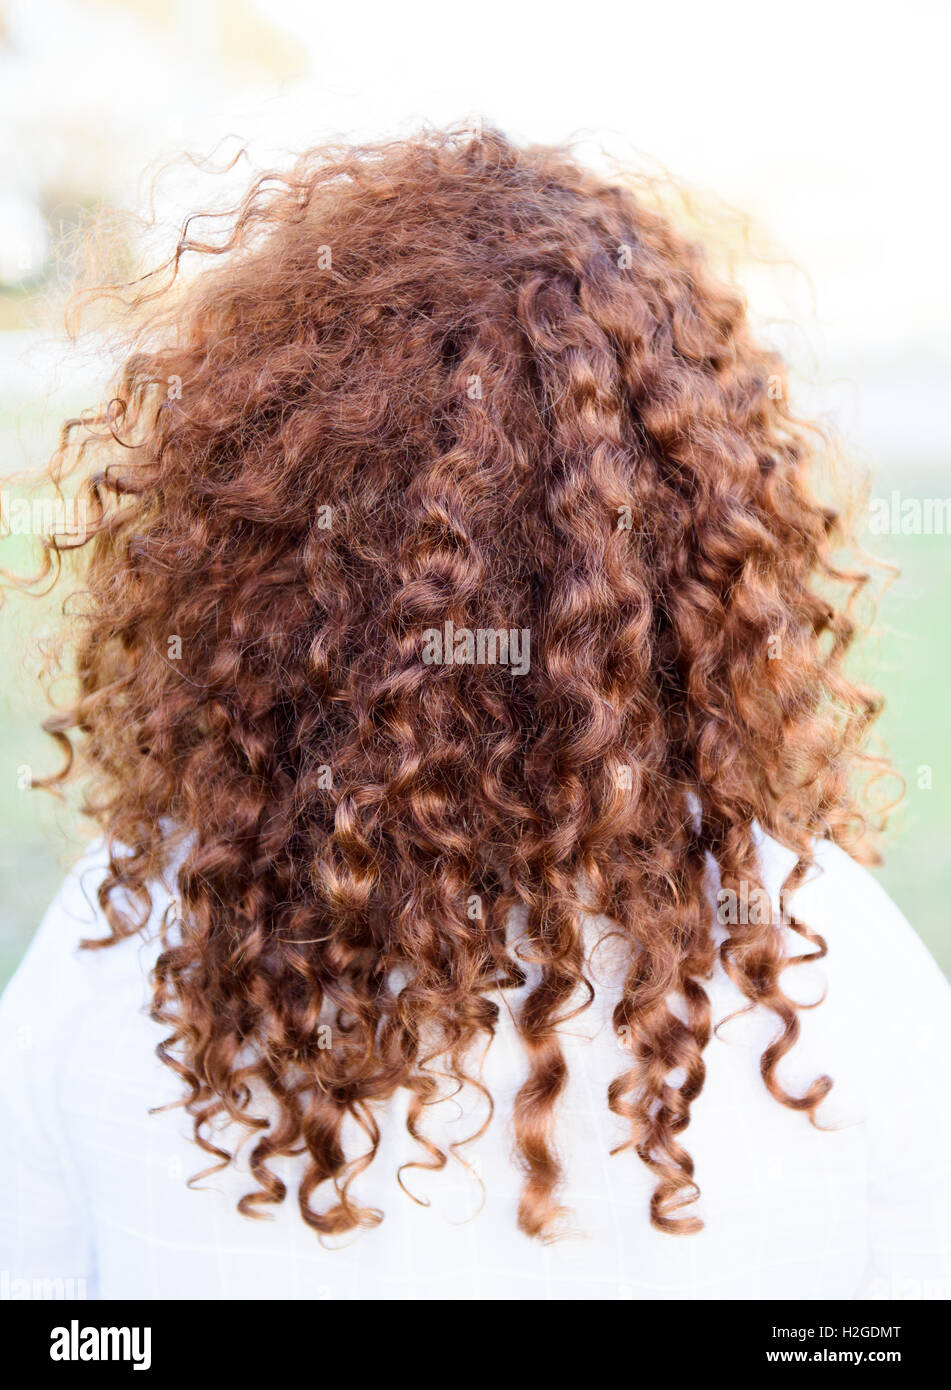 Girl with red curly hair Stock Photo